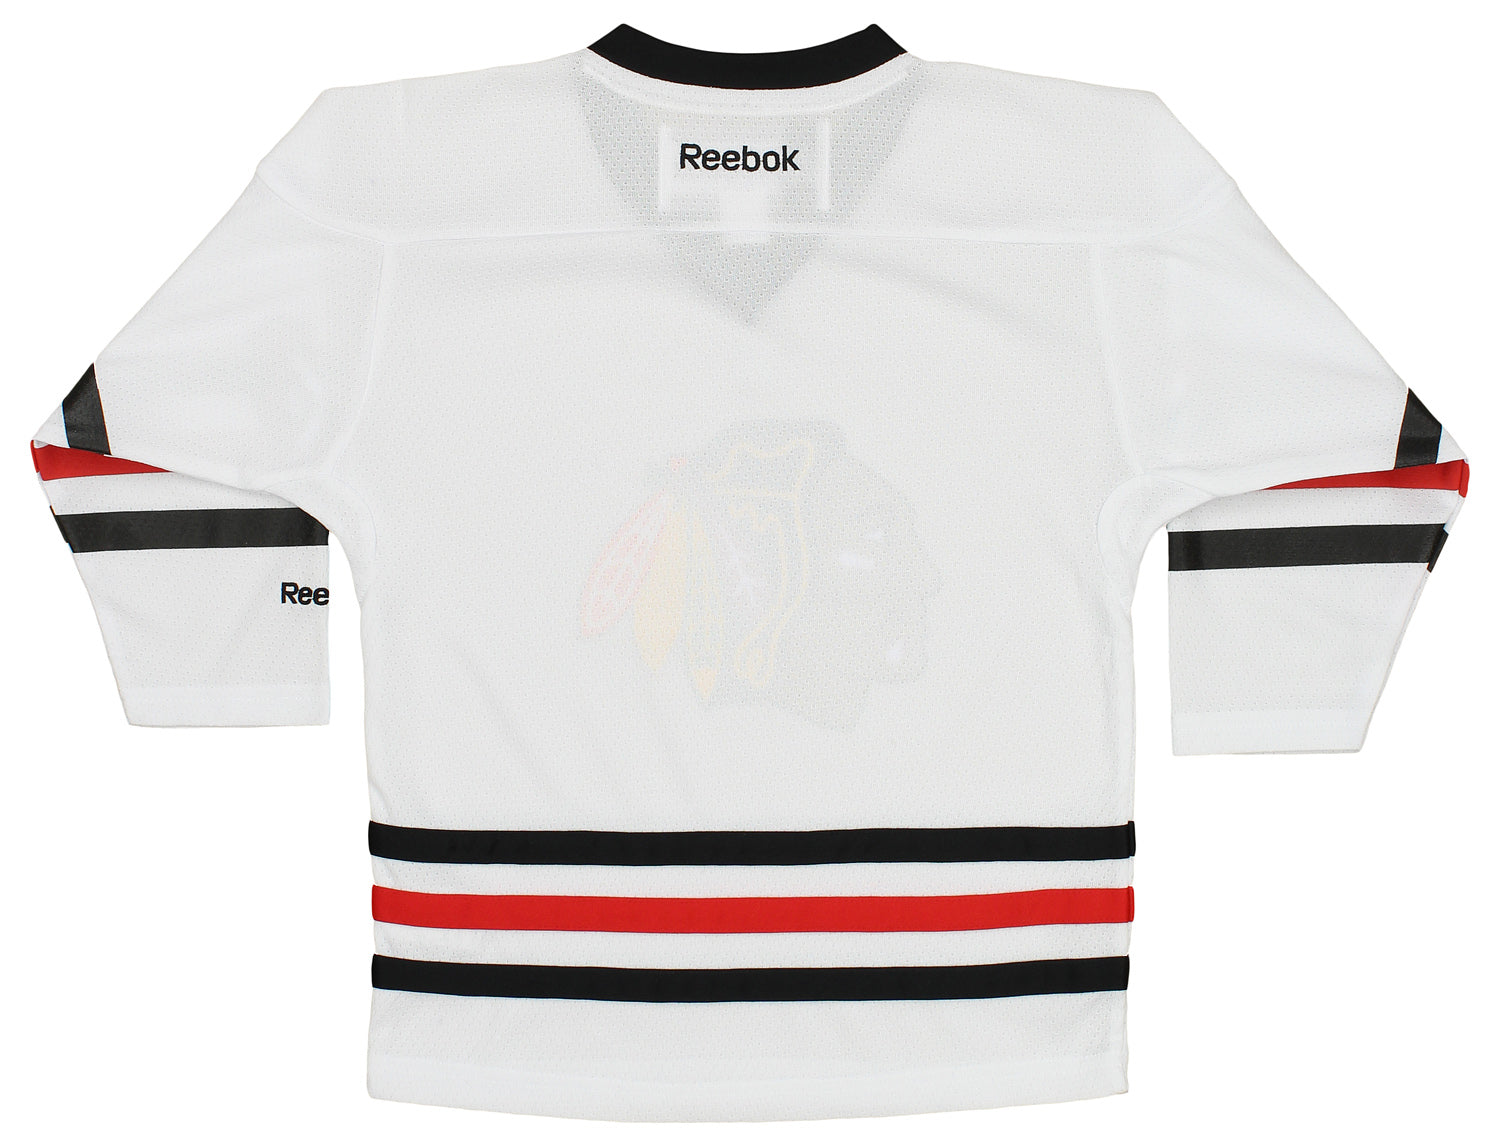  NHL Youth Chicago Blackhawks White Replica Jersey - R58Hzbdd  (White, Large/X-Large) : Sports & Outdoors